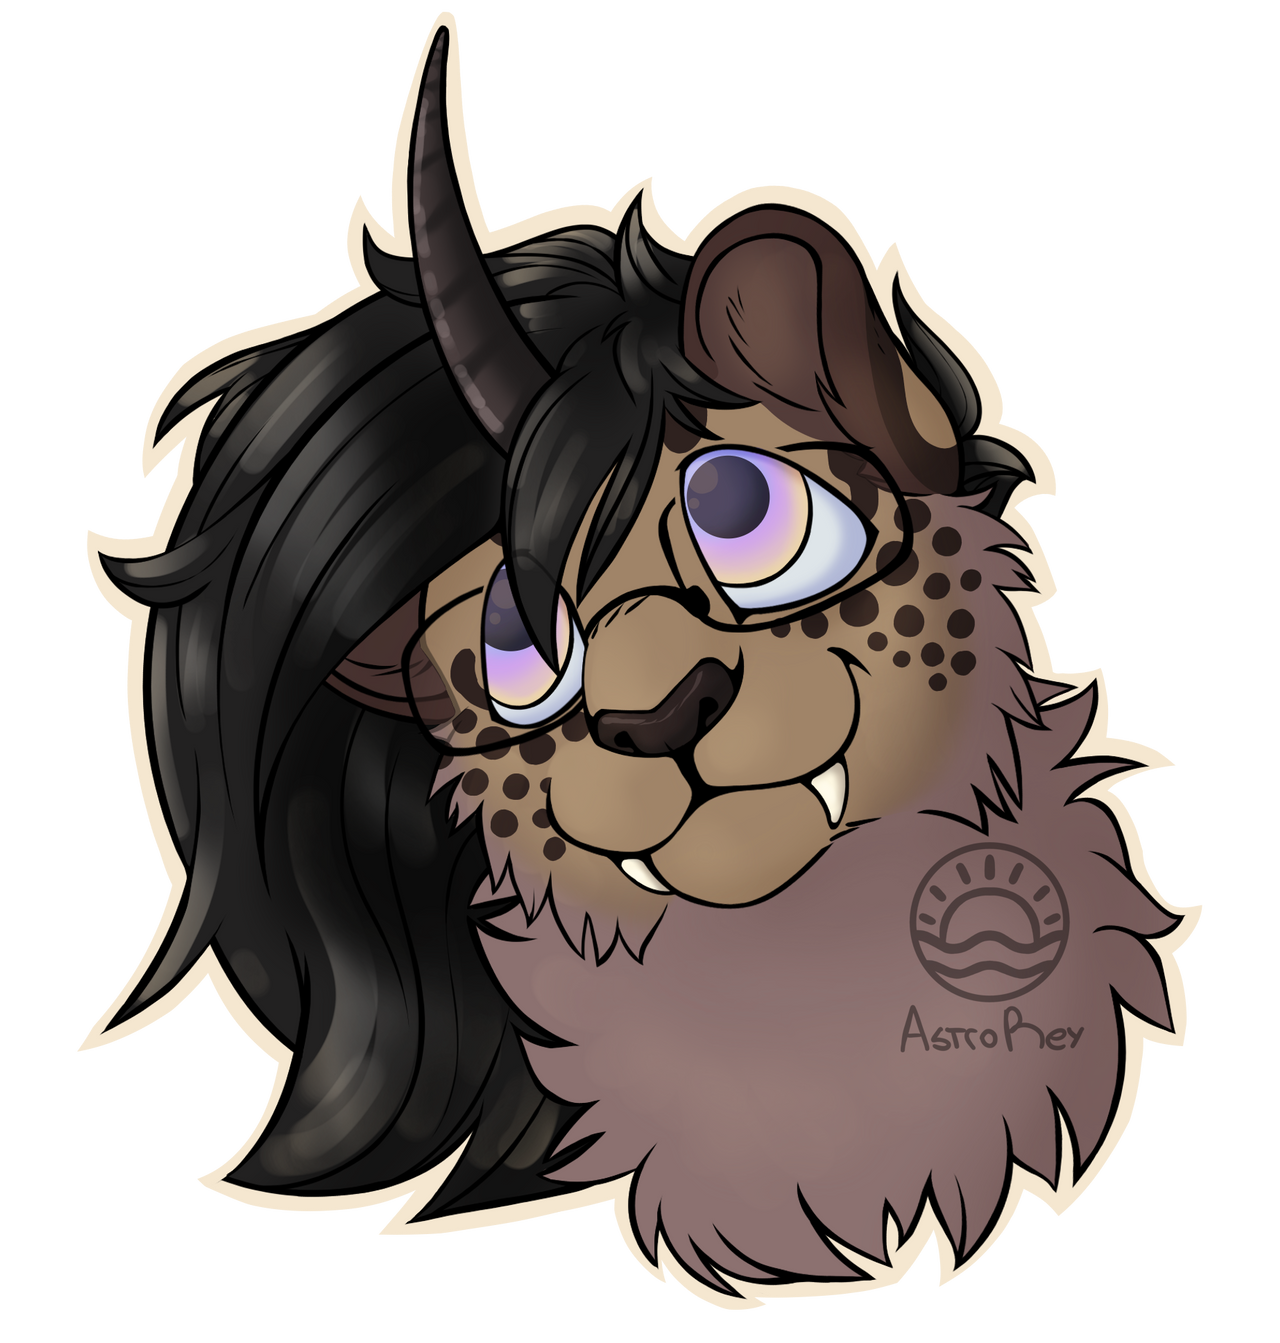 headshot_commission_by_astro_sartshop_dexmj17-fullview.png